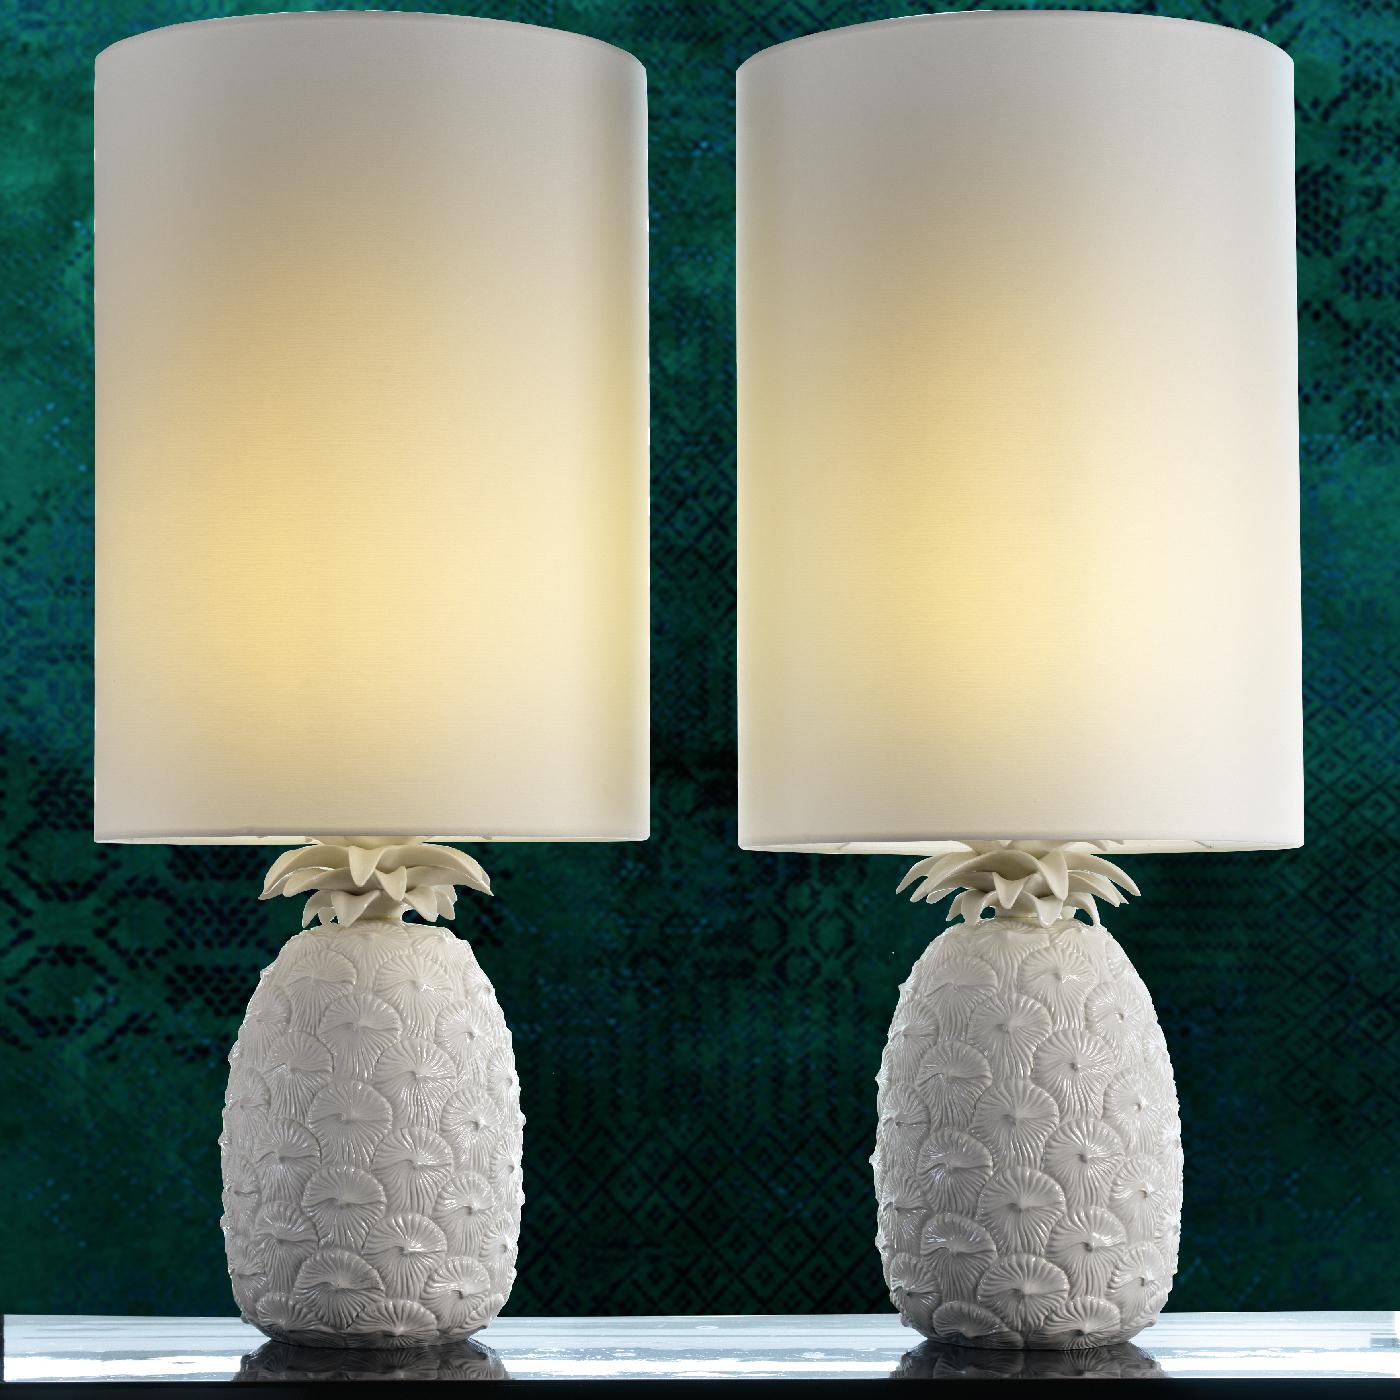 The outstanding feature of this exceptional table lamp lies the meticulous decoration of its shiny white porcelain base. The wide cylindrical lampshade diffuses a warm light, while also highlighting the precious inlay of the base, which perfectly